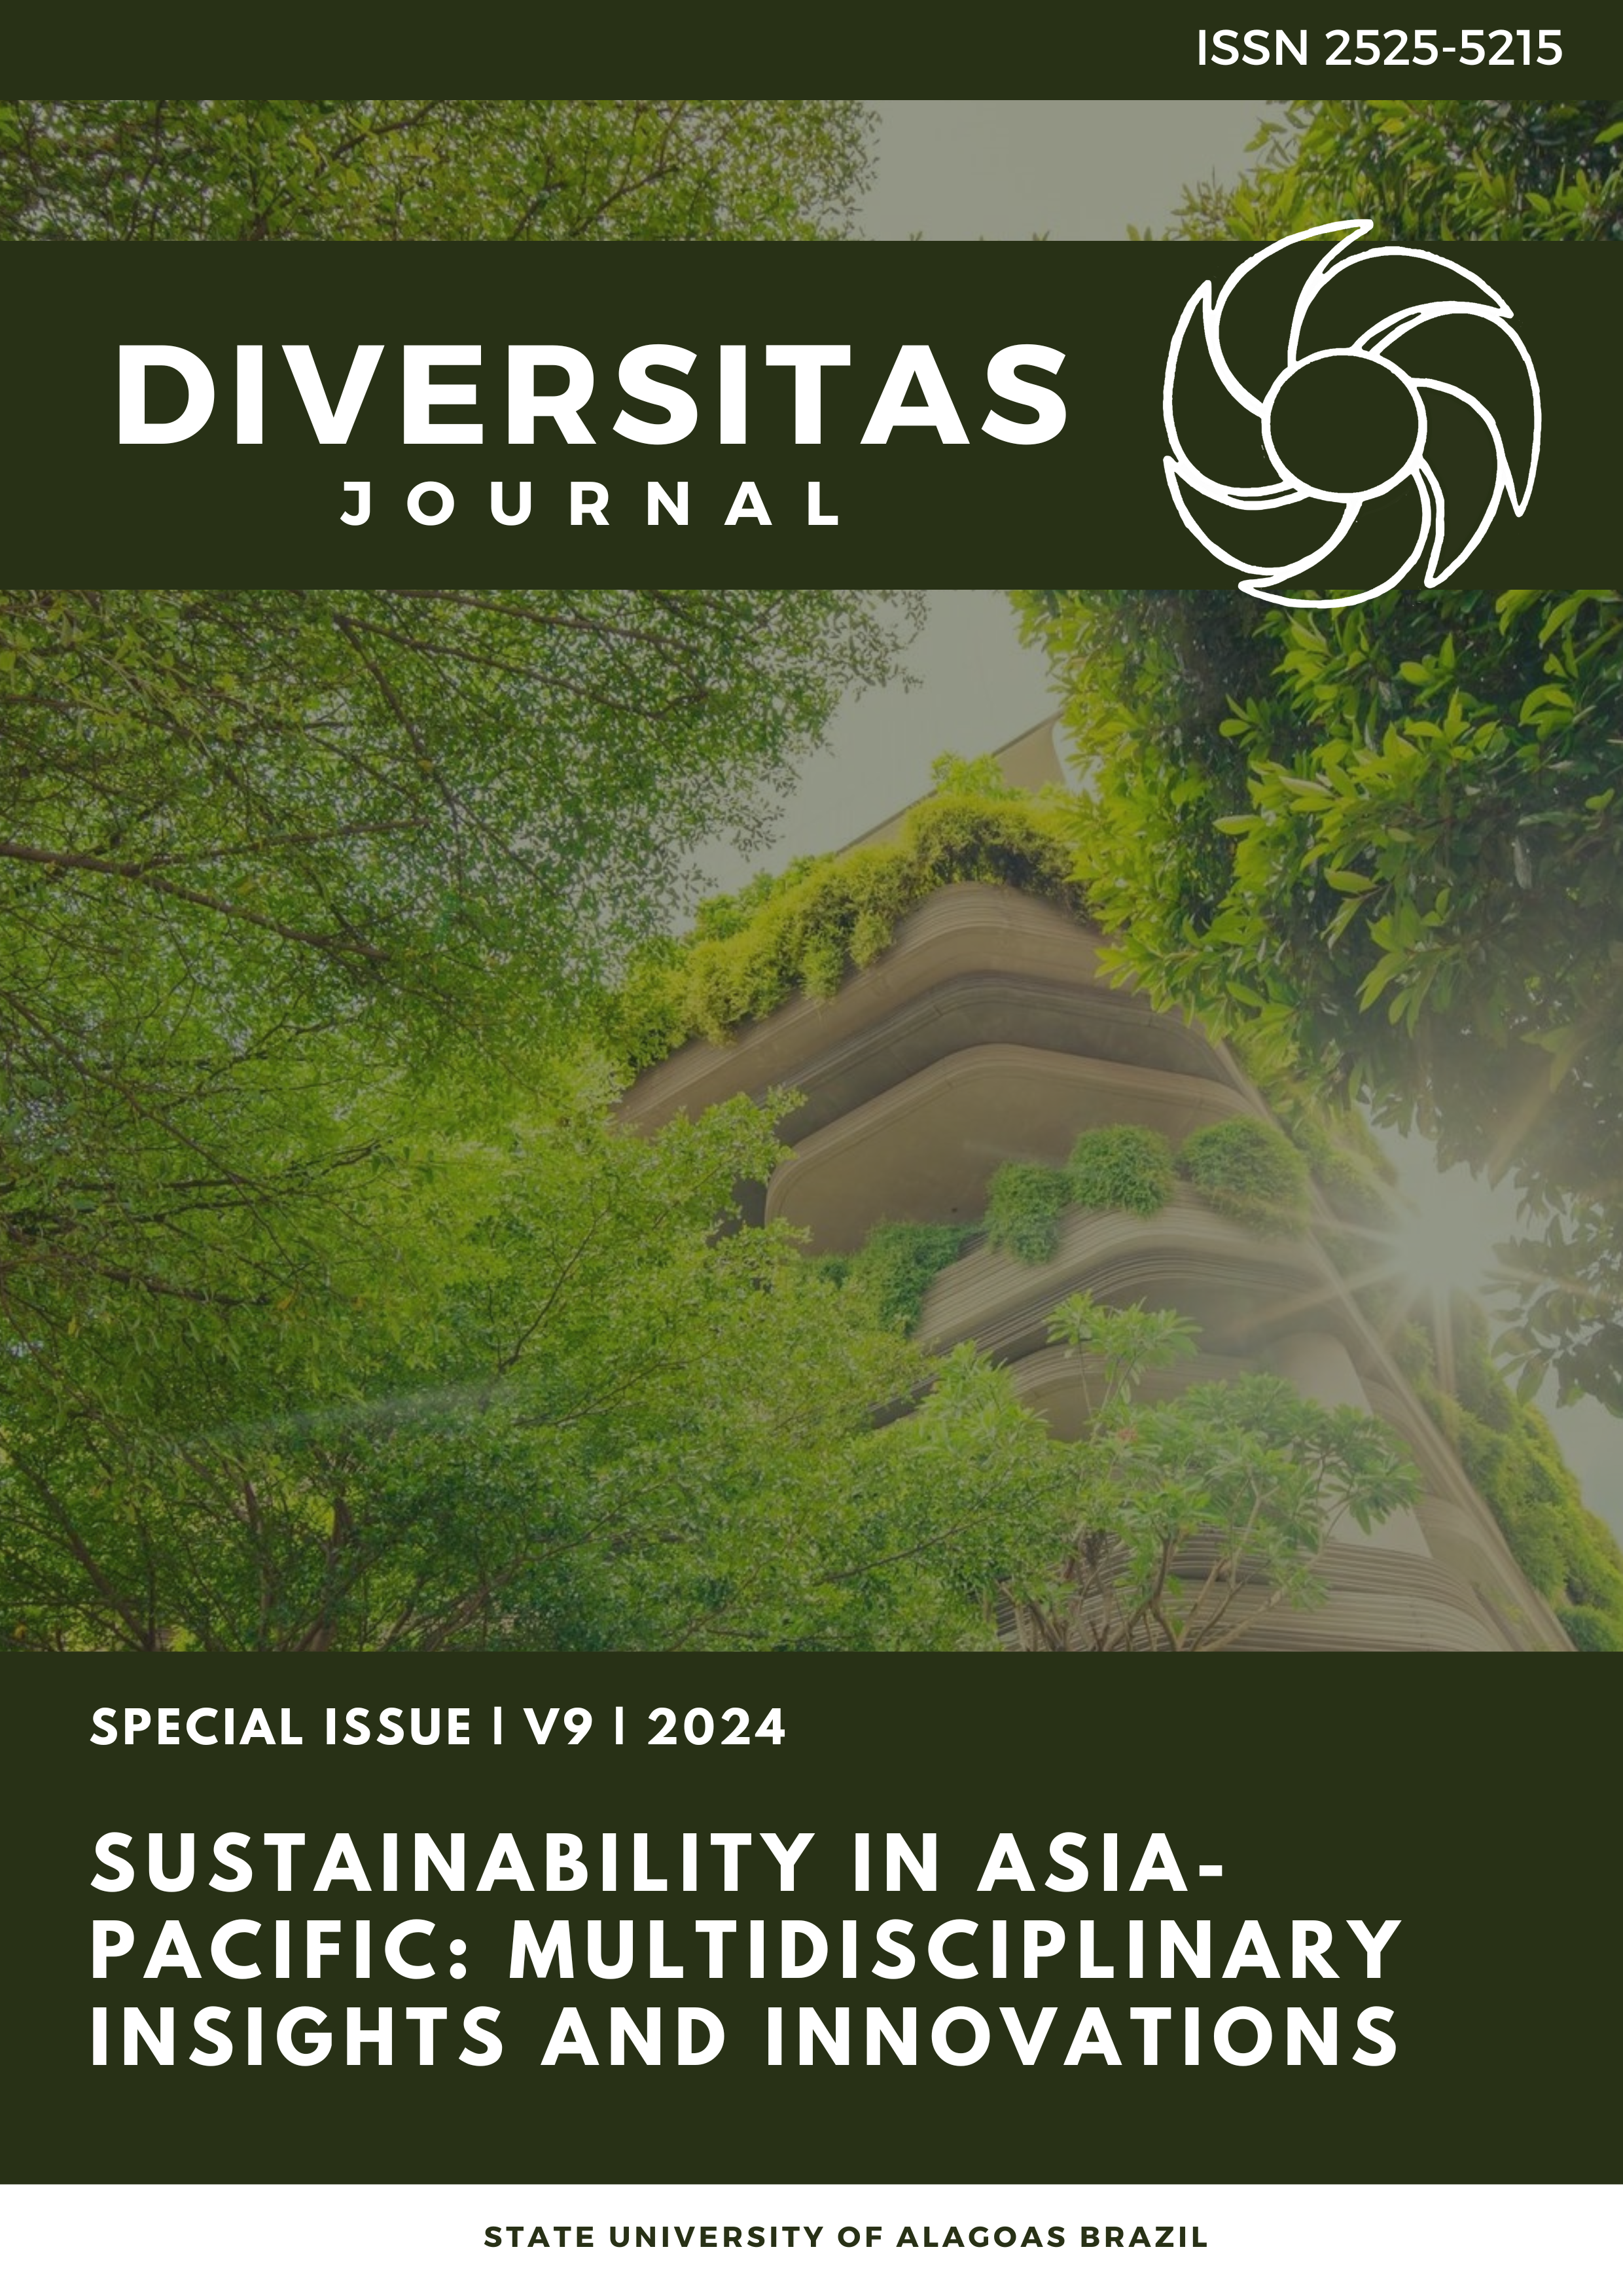 					View Vol. 9 No. 1_Special (2024): Sustainability in Asia-Pacific: Multidisciplinary Insights and Innovations
				